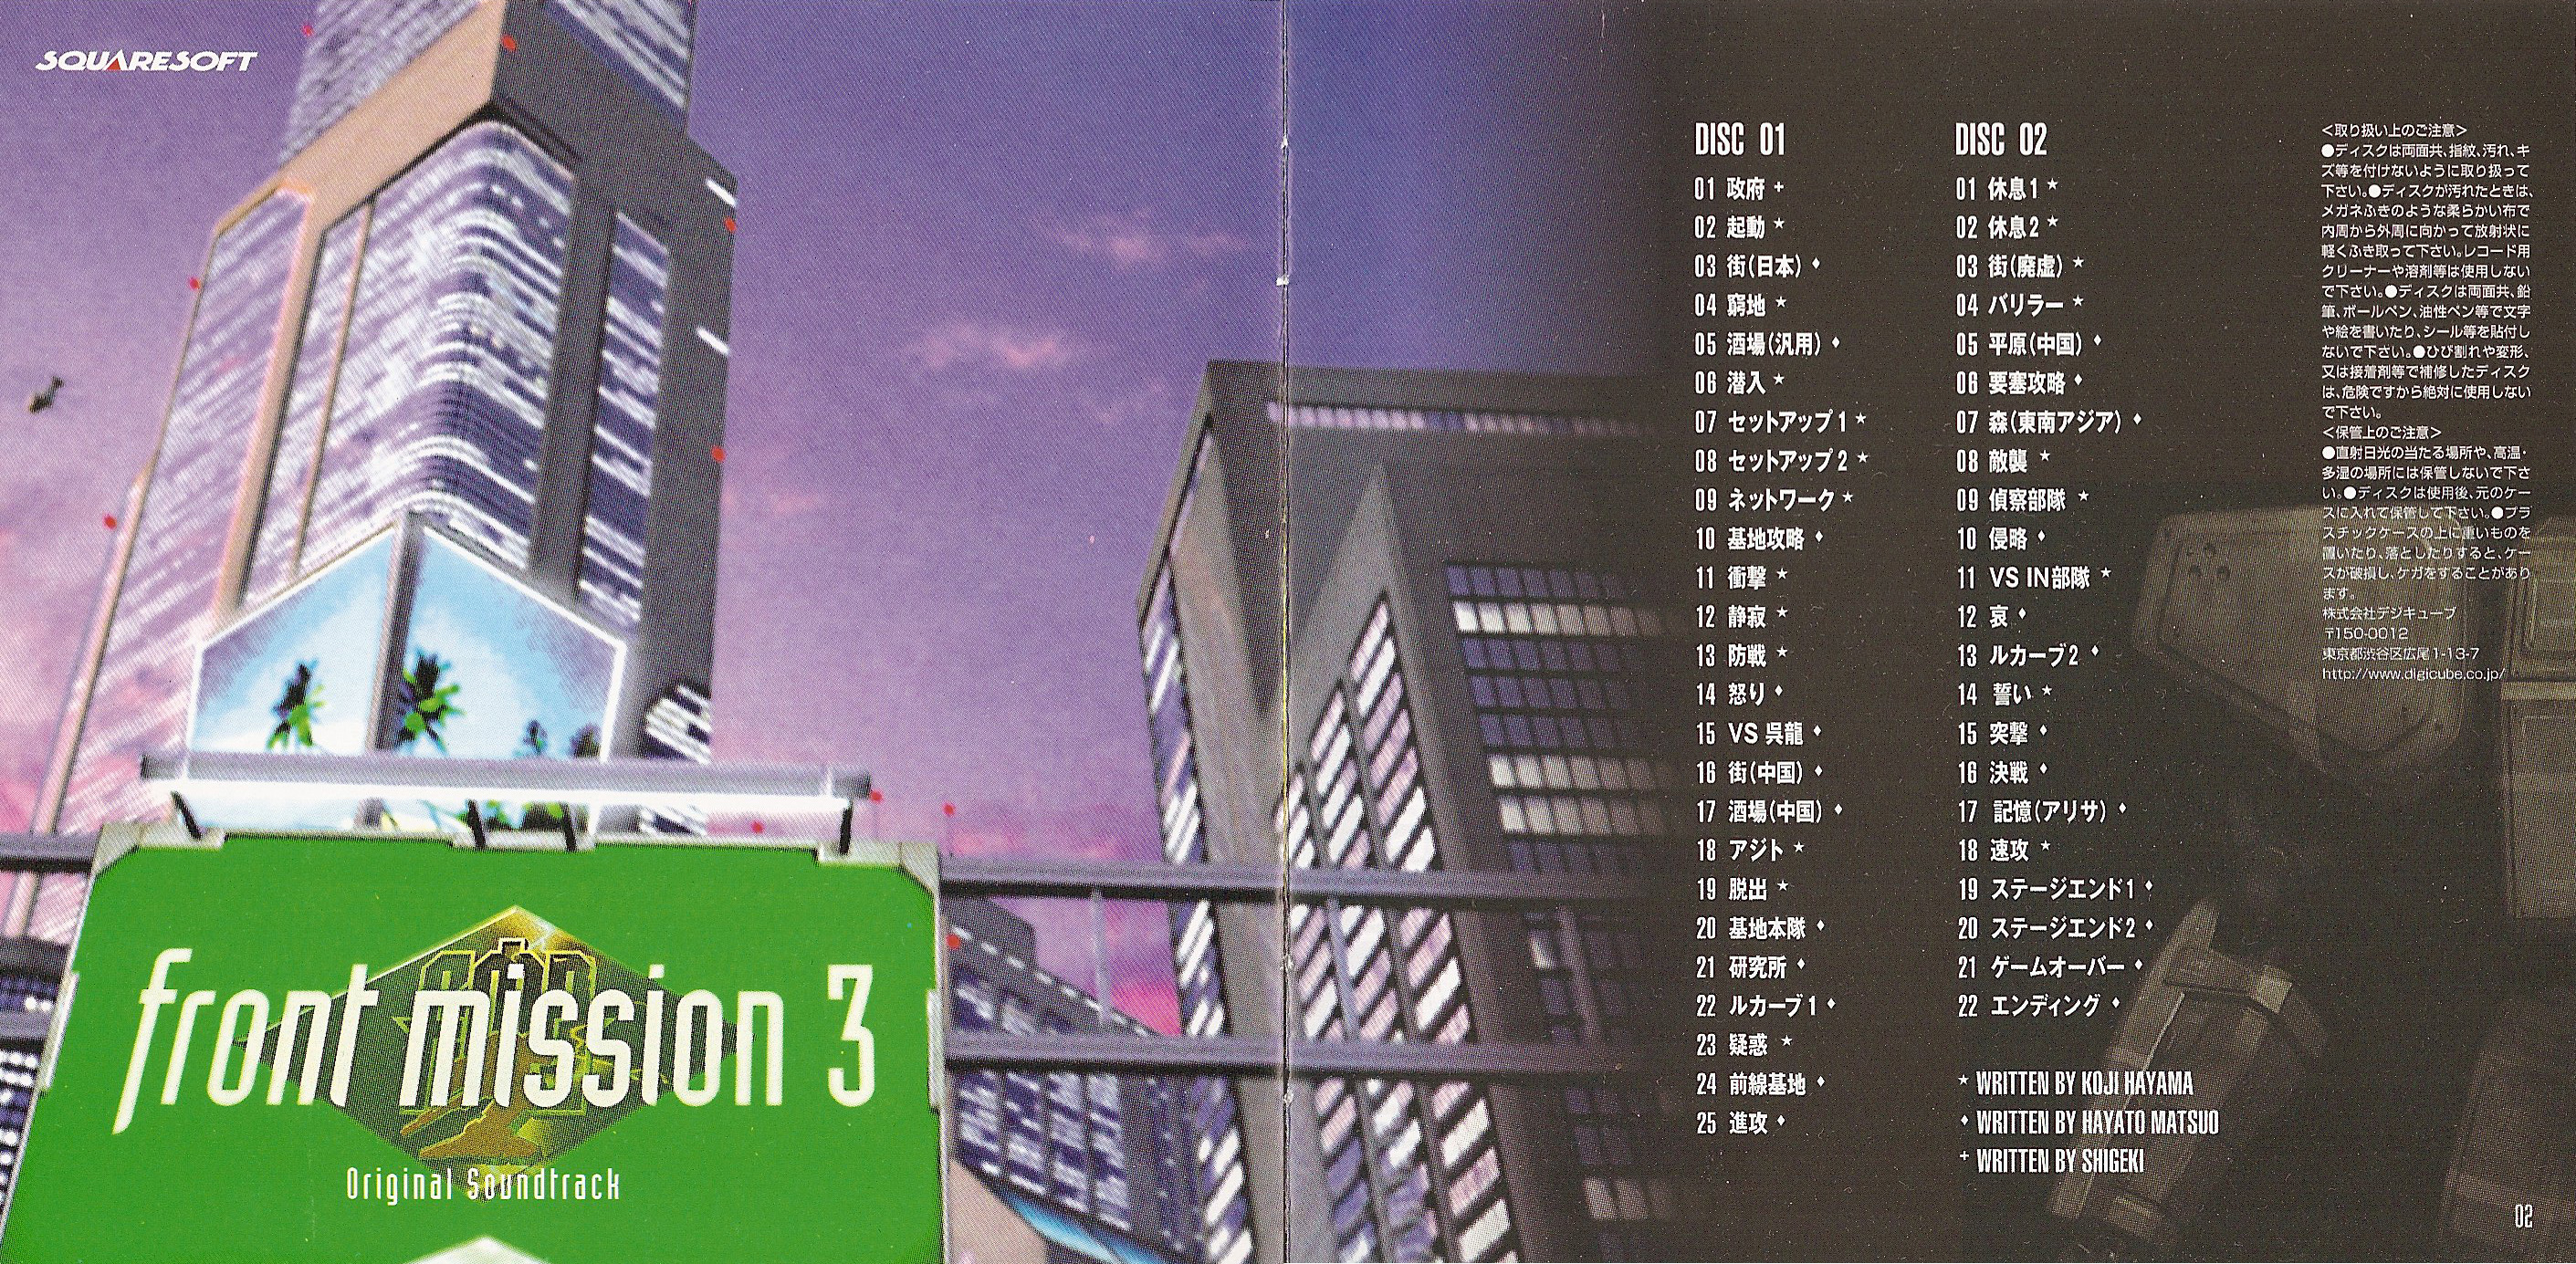 FM3 cover - ost #04 booklet